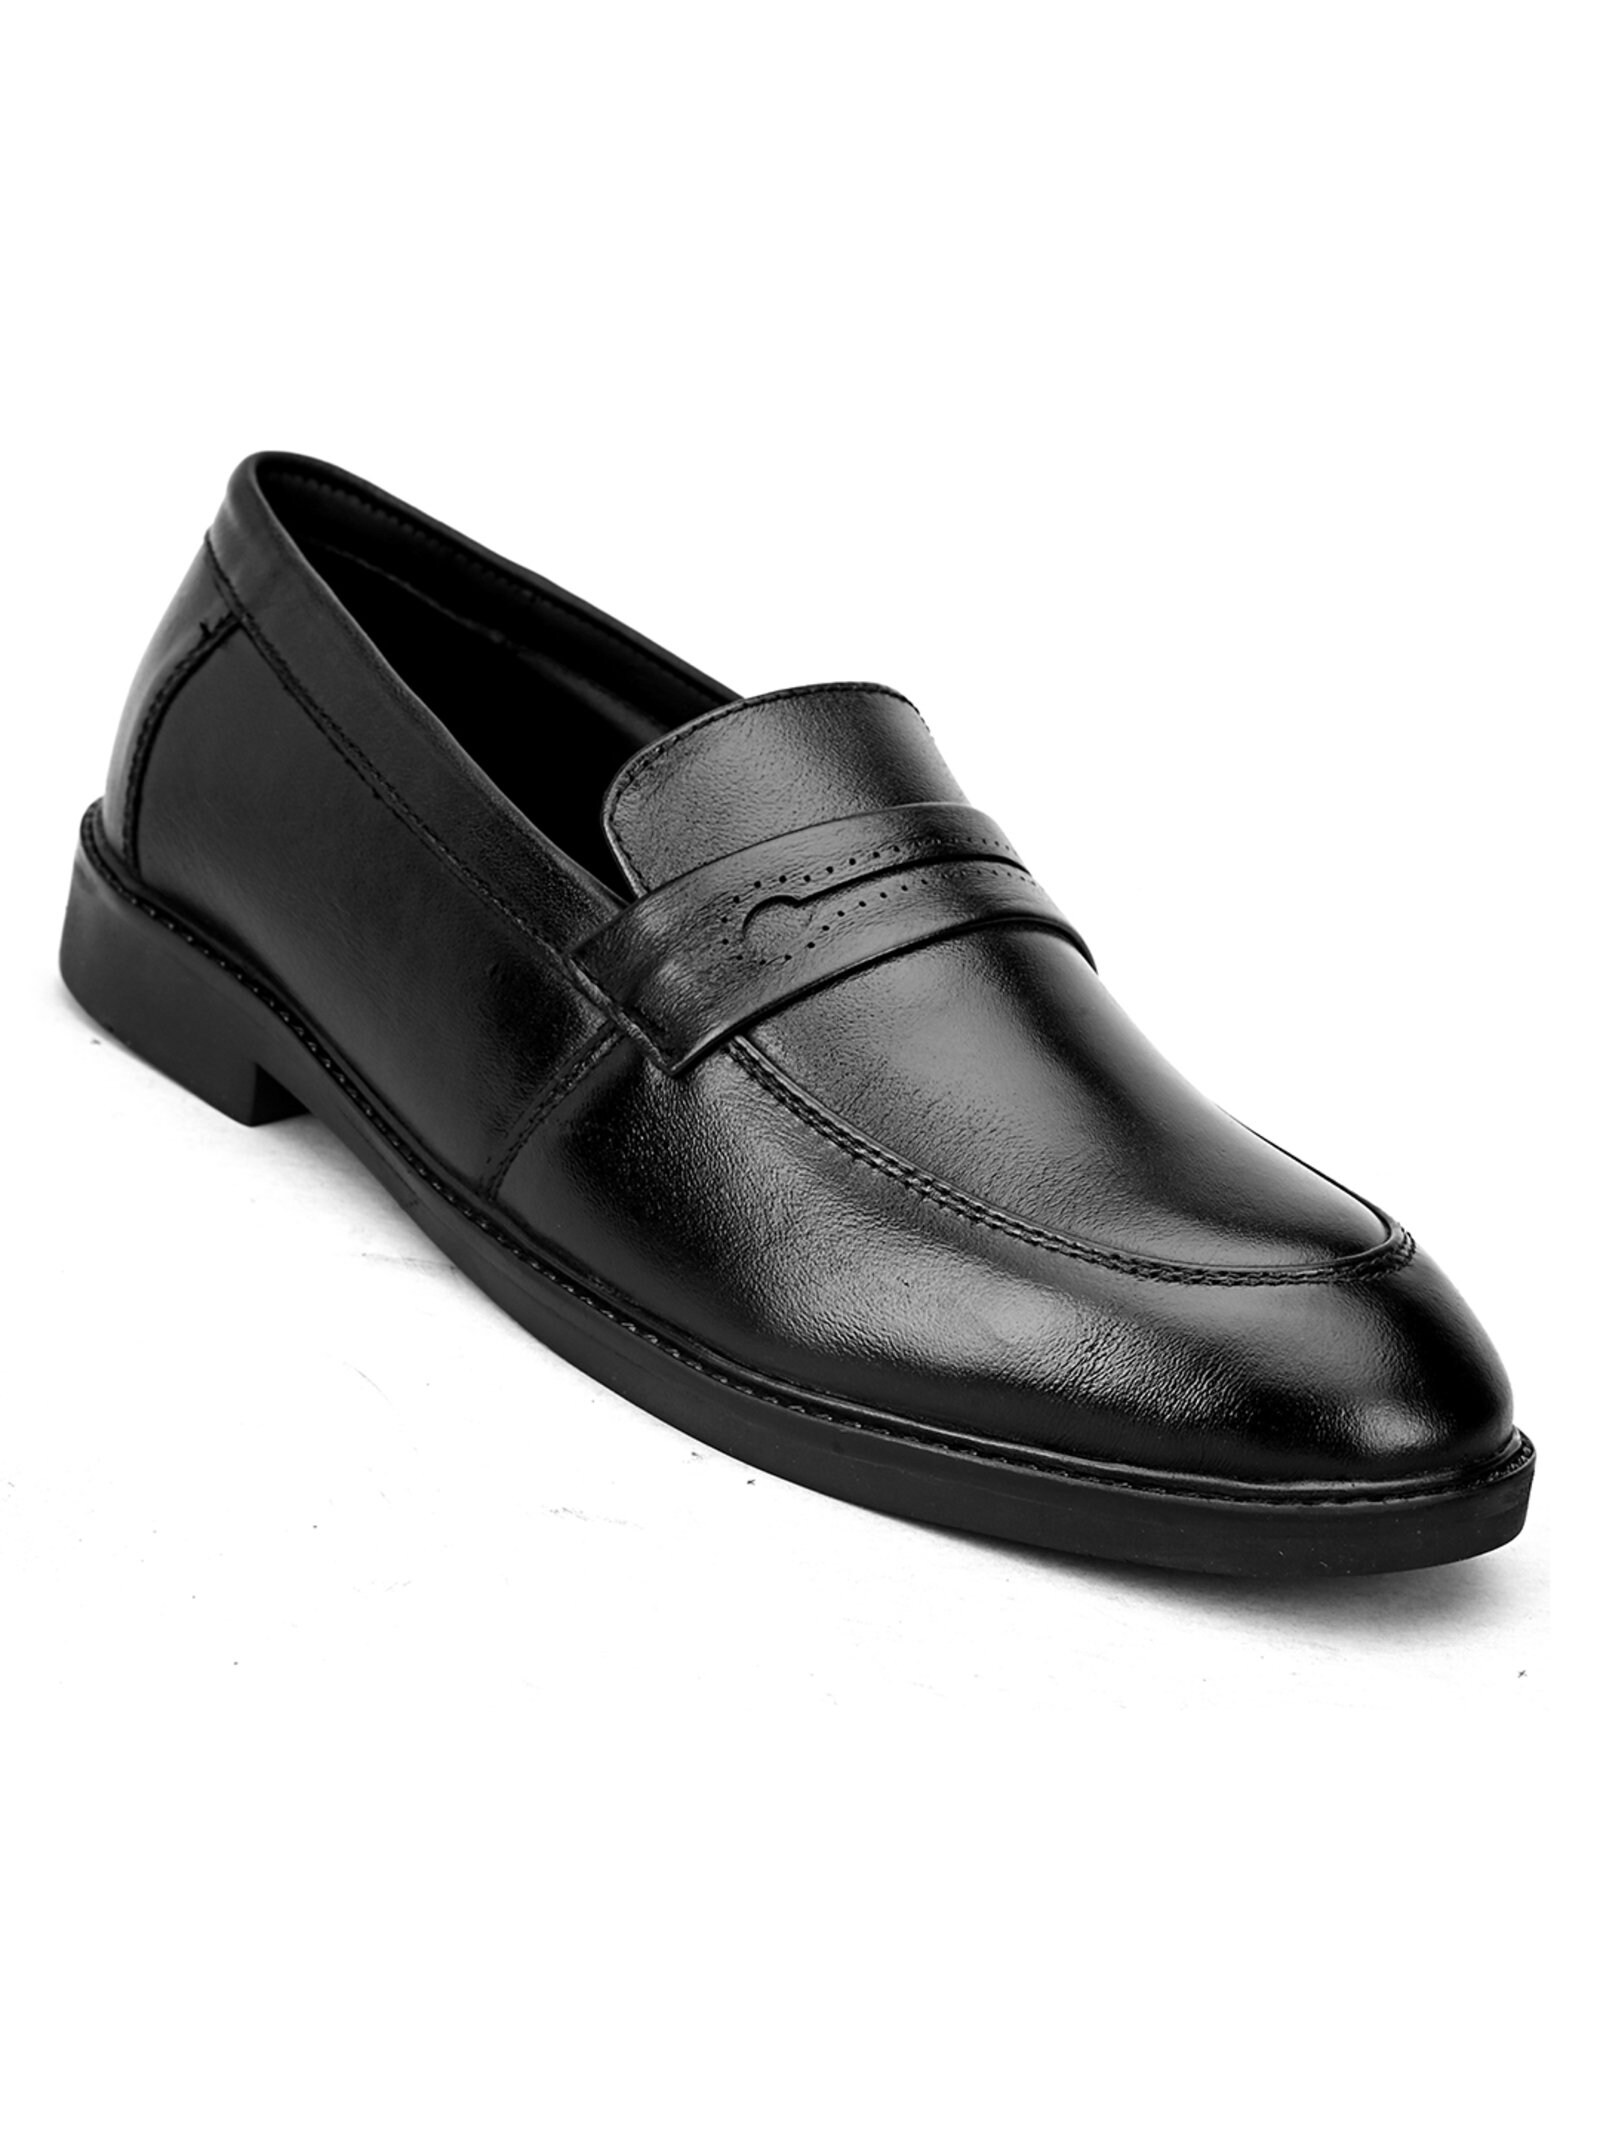 Mens Shoes Slip-on shoes Slippers Save 30% Loewe Pull Tab Leather Loafers in Black for Men 